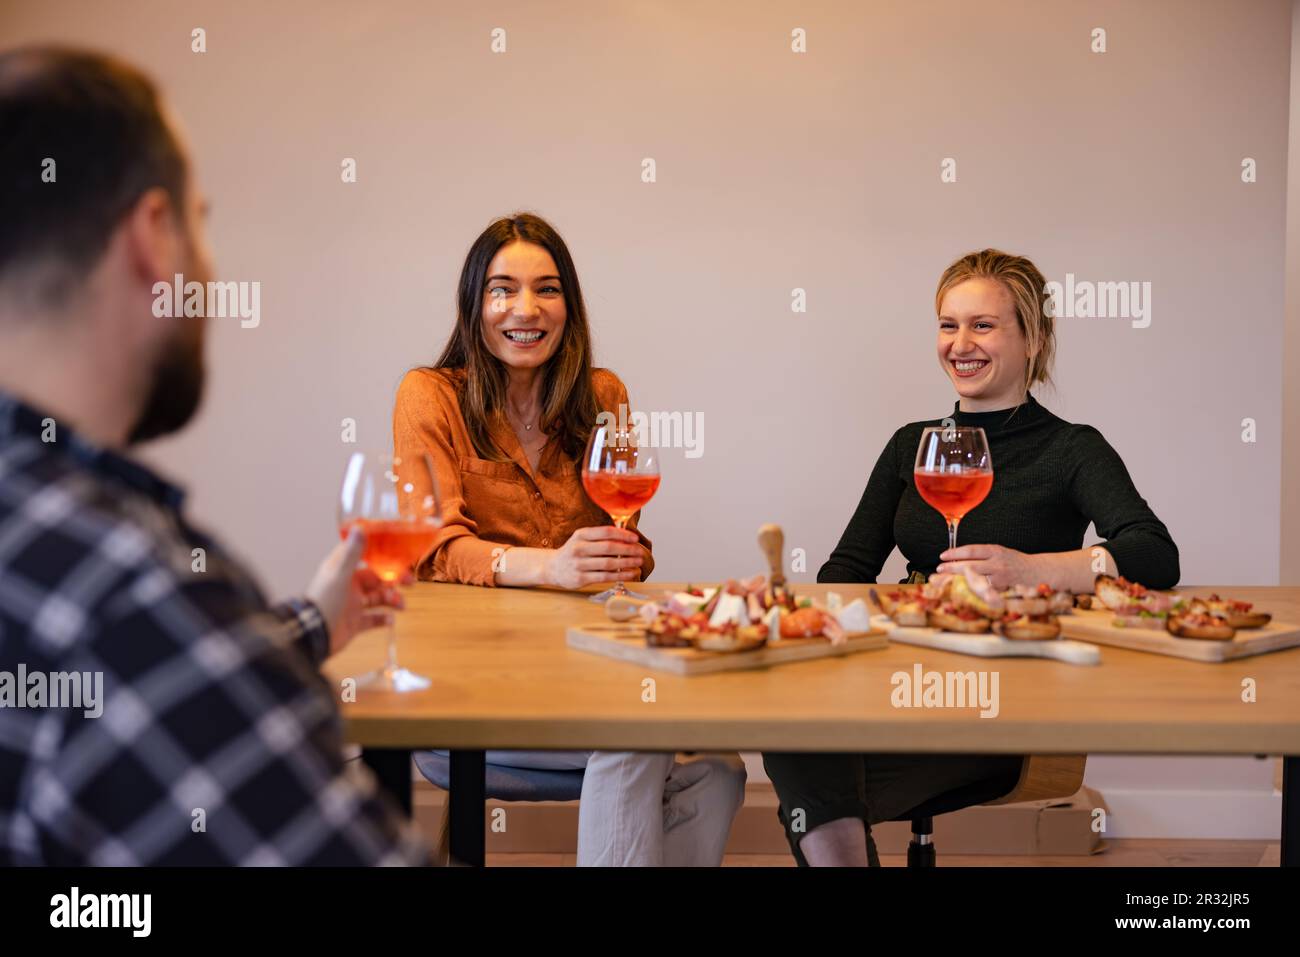 Young group of people enjoying a meal at home. Stock Photo